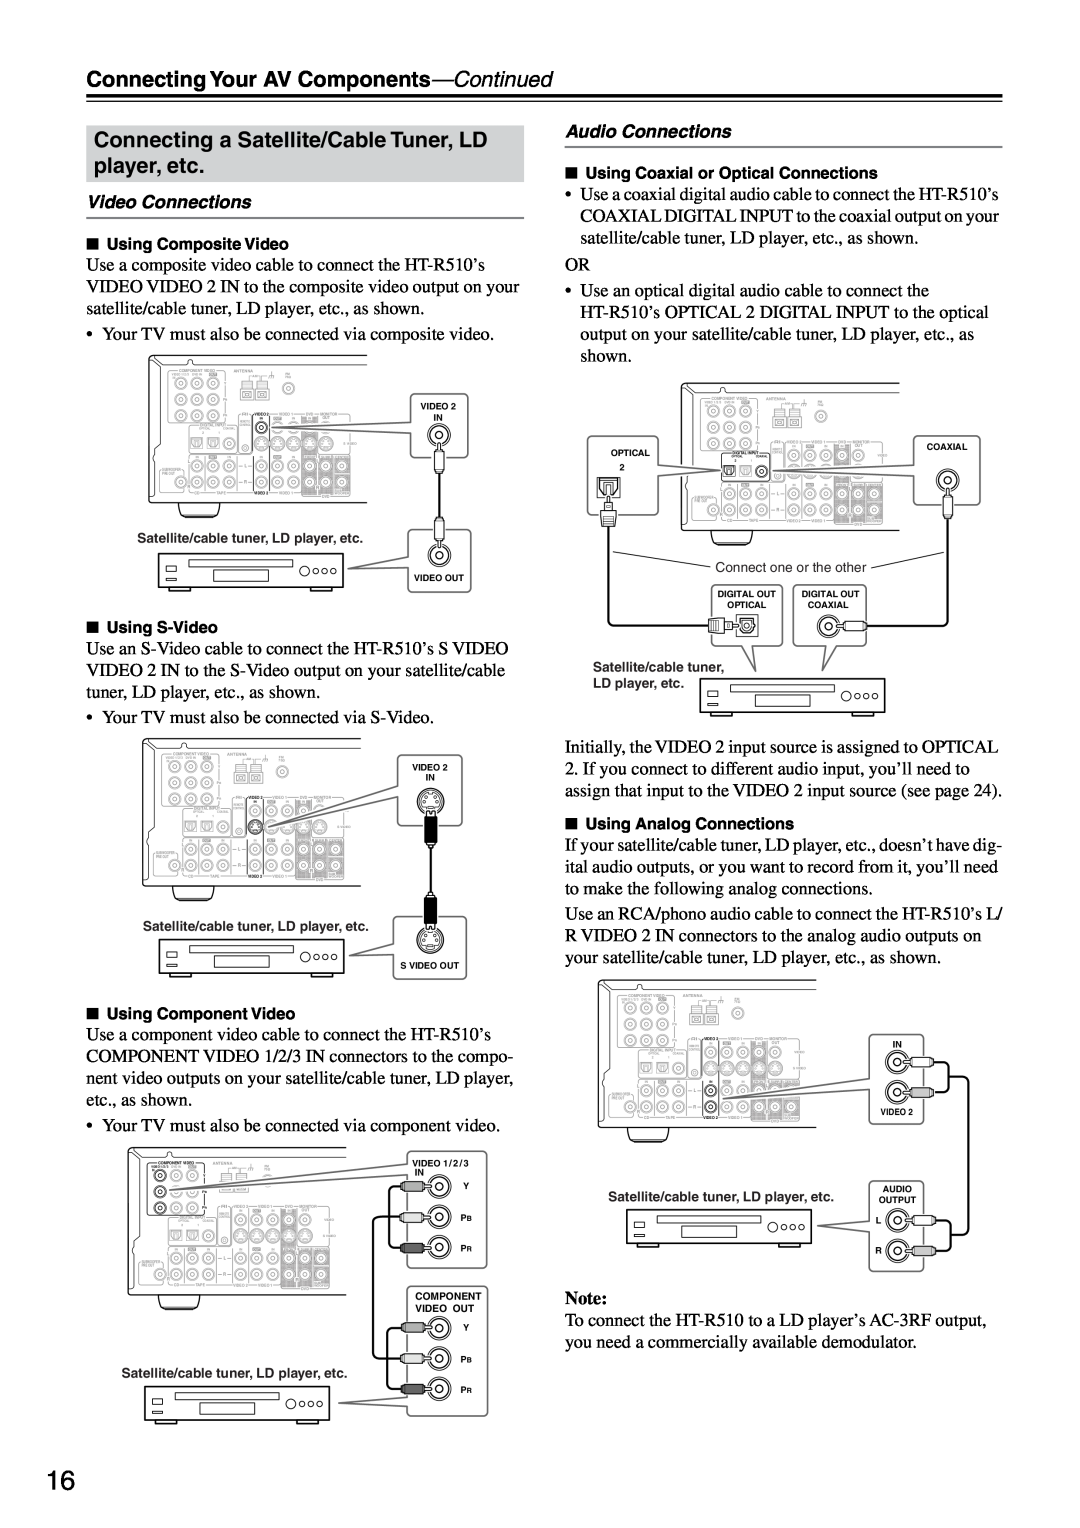 Onkyo HT-R510 instruction manual Connecting Your AV Components-Continued, Video Connections, Audio Connections 